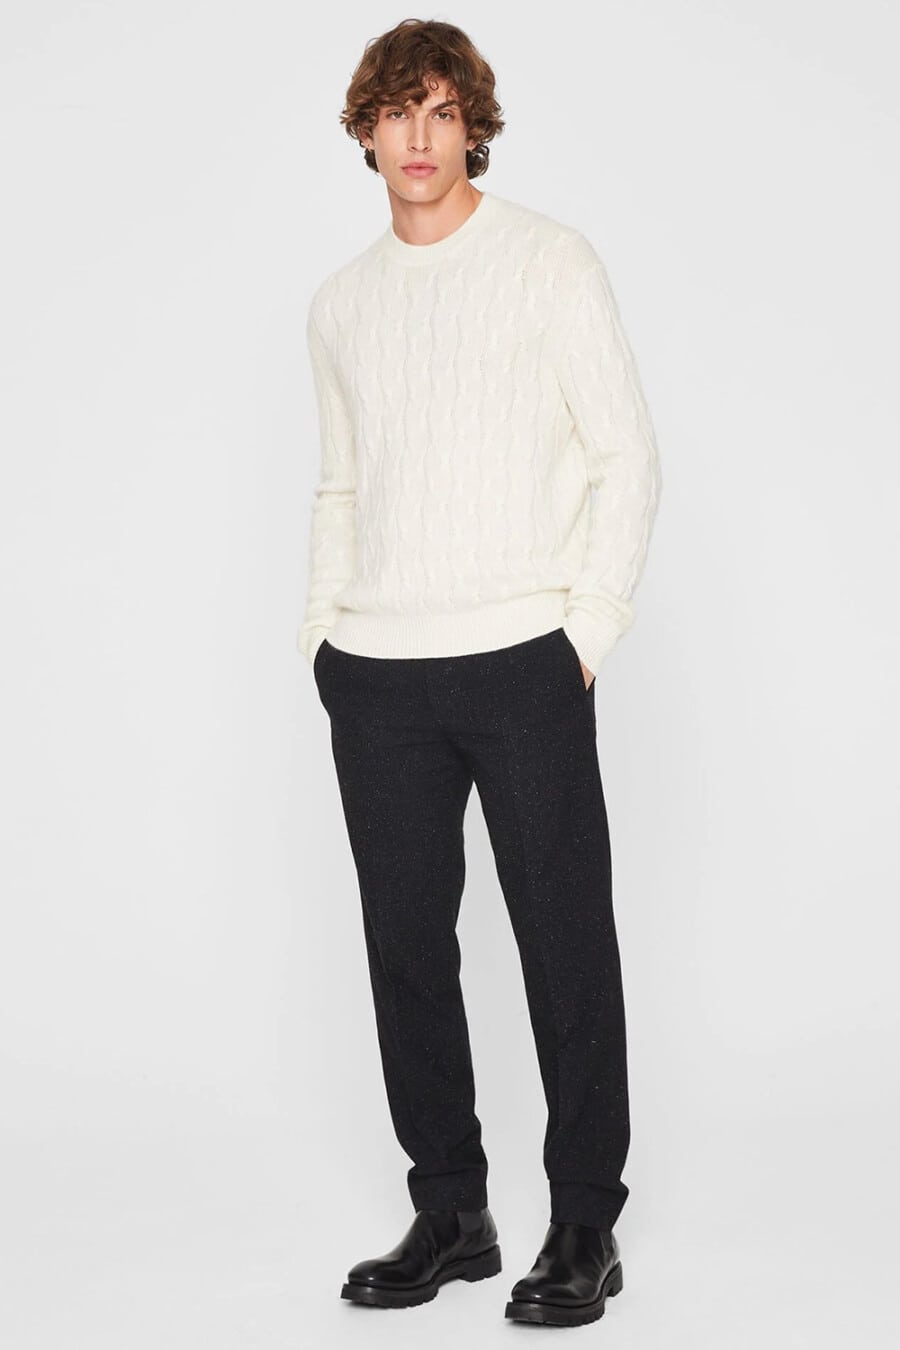 Men's black wool pants, white cable knit sweater and black leather Chelsea boots outfit